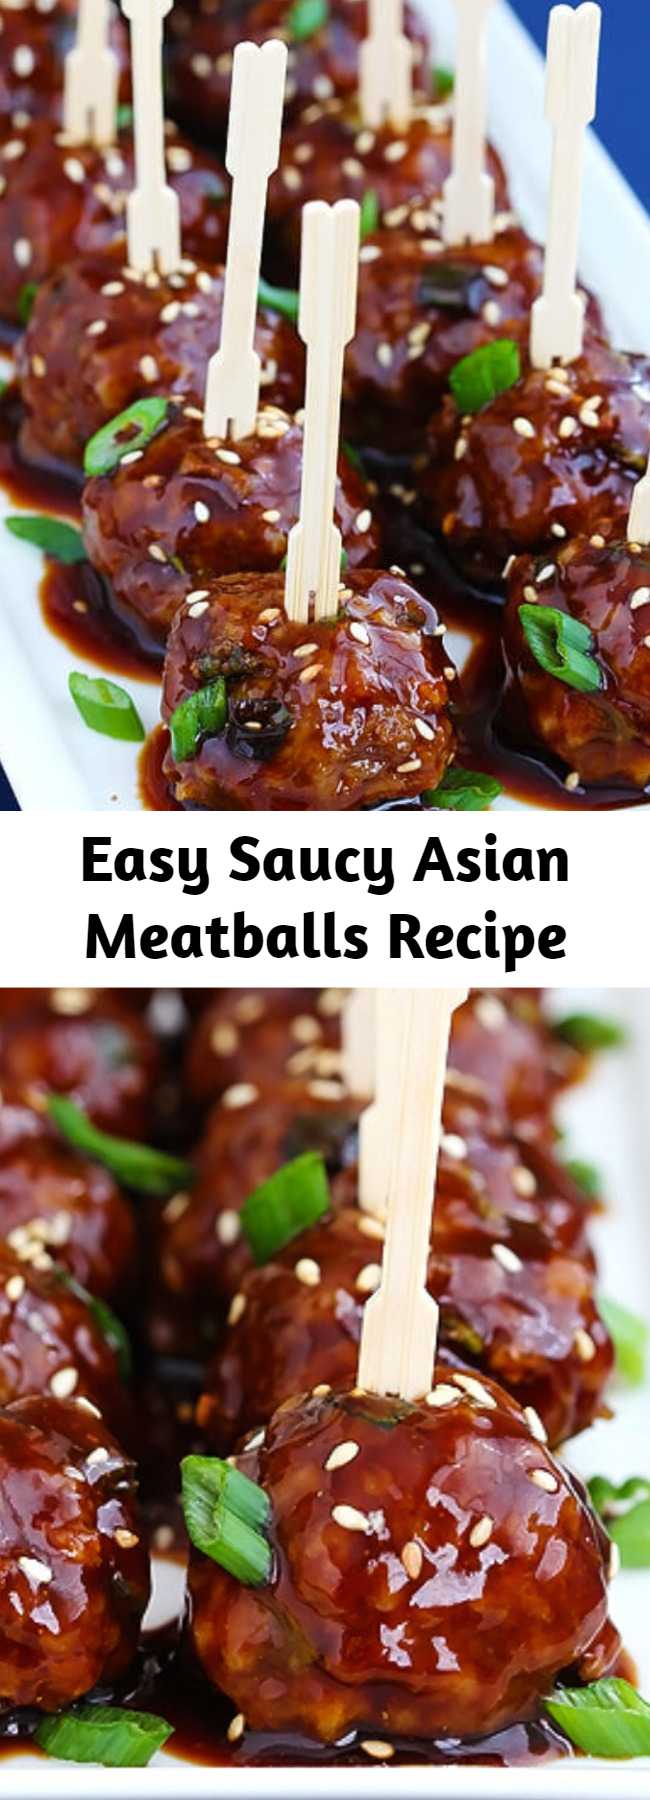 Easy Saucy Asian Meatballs Recipe - You will love this delicious saucy Asian meatballs recipe! It’s so flavorful, saucy, and perfect for game day or as an appetizer for special occasions.